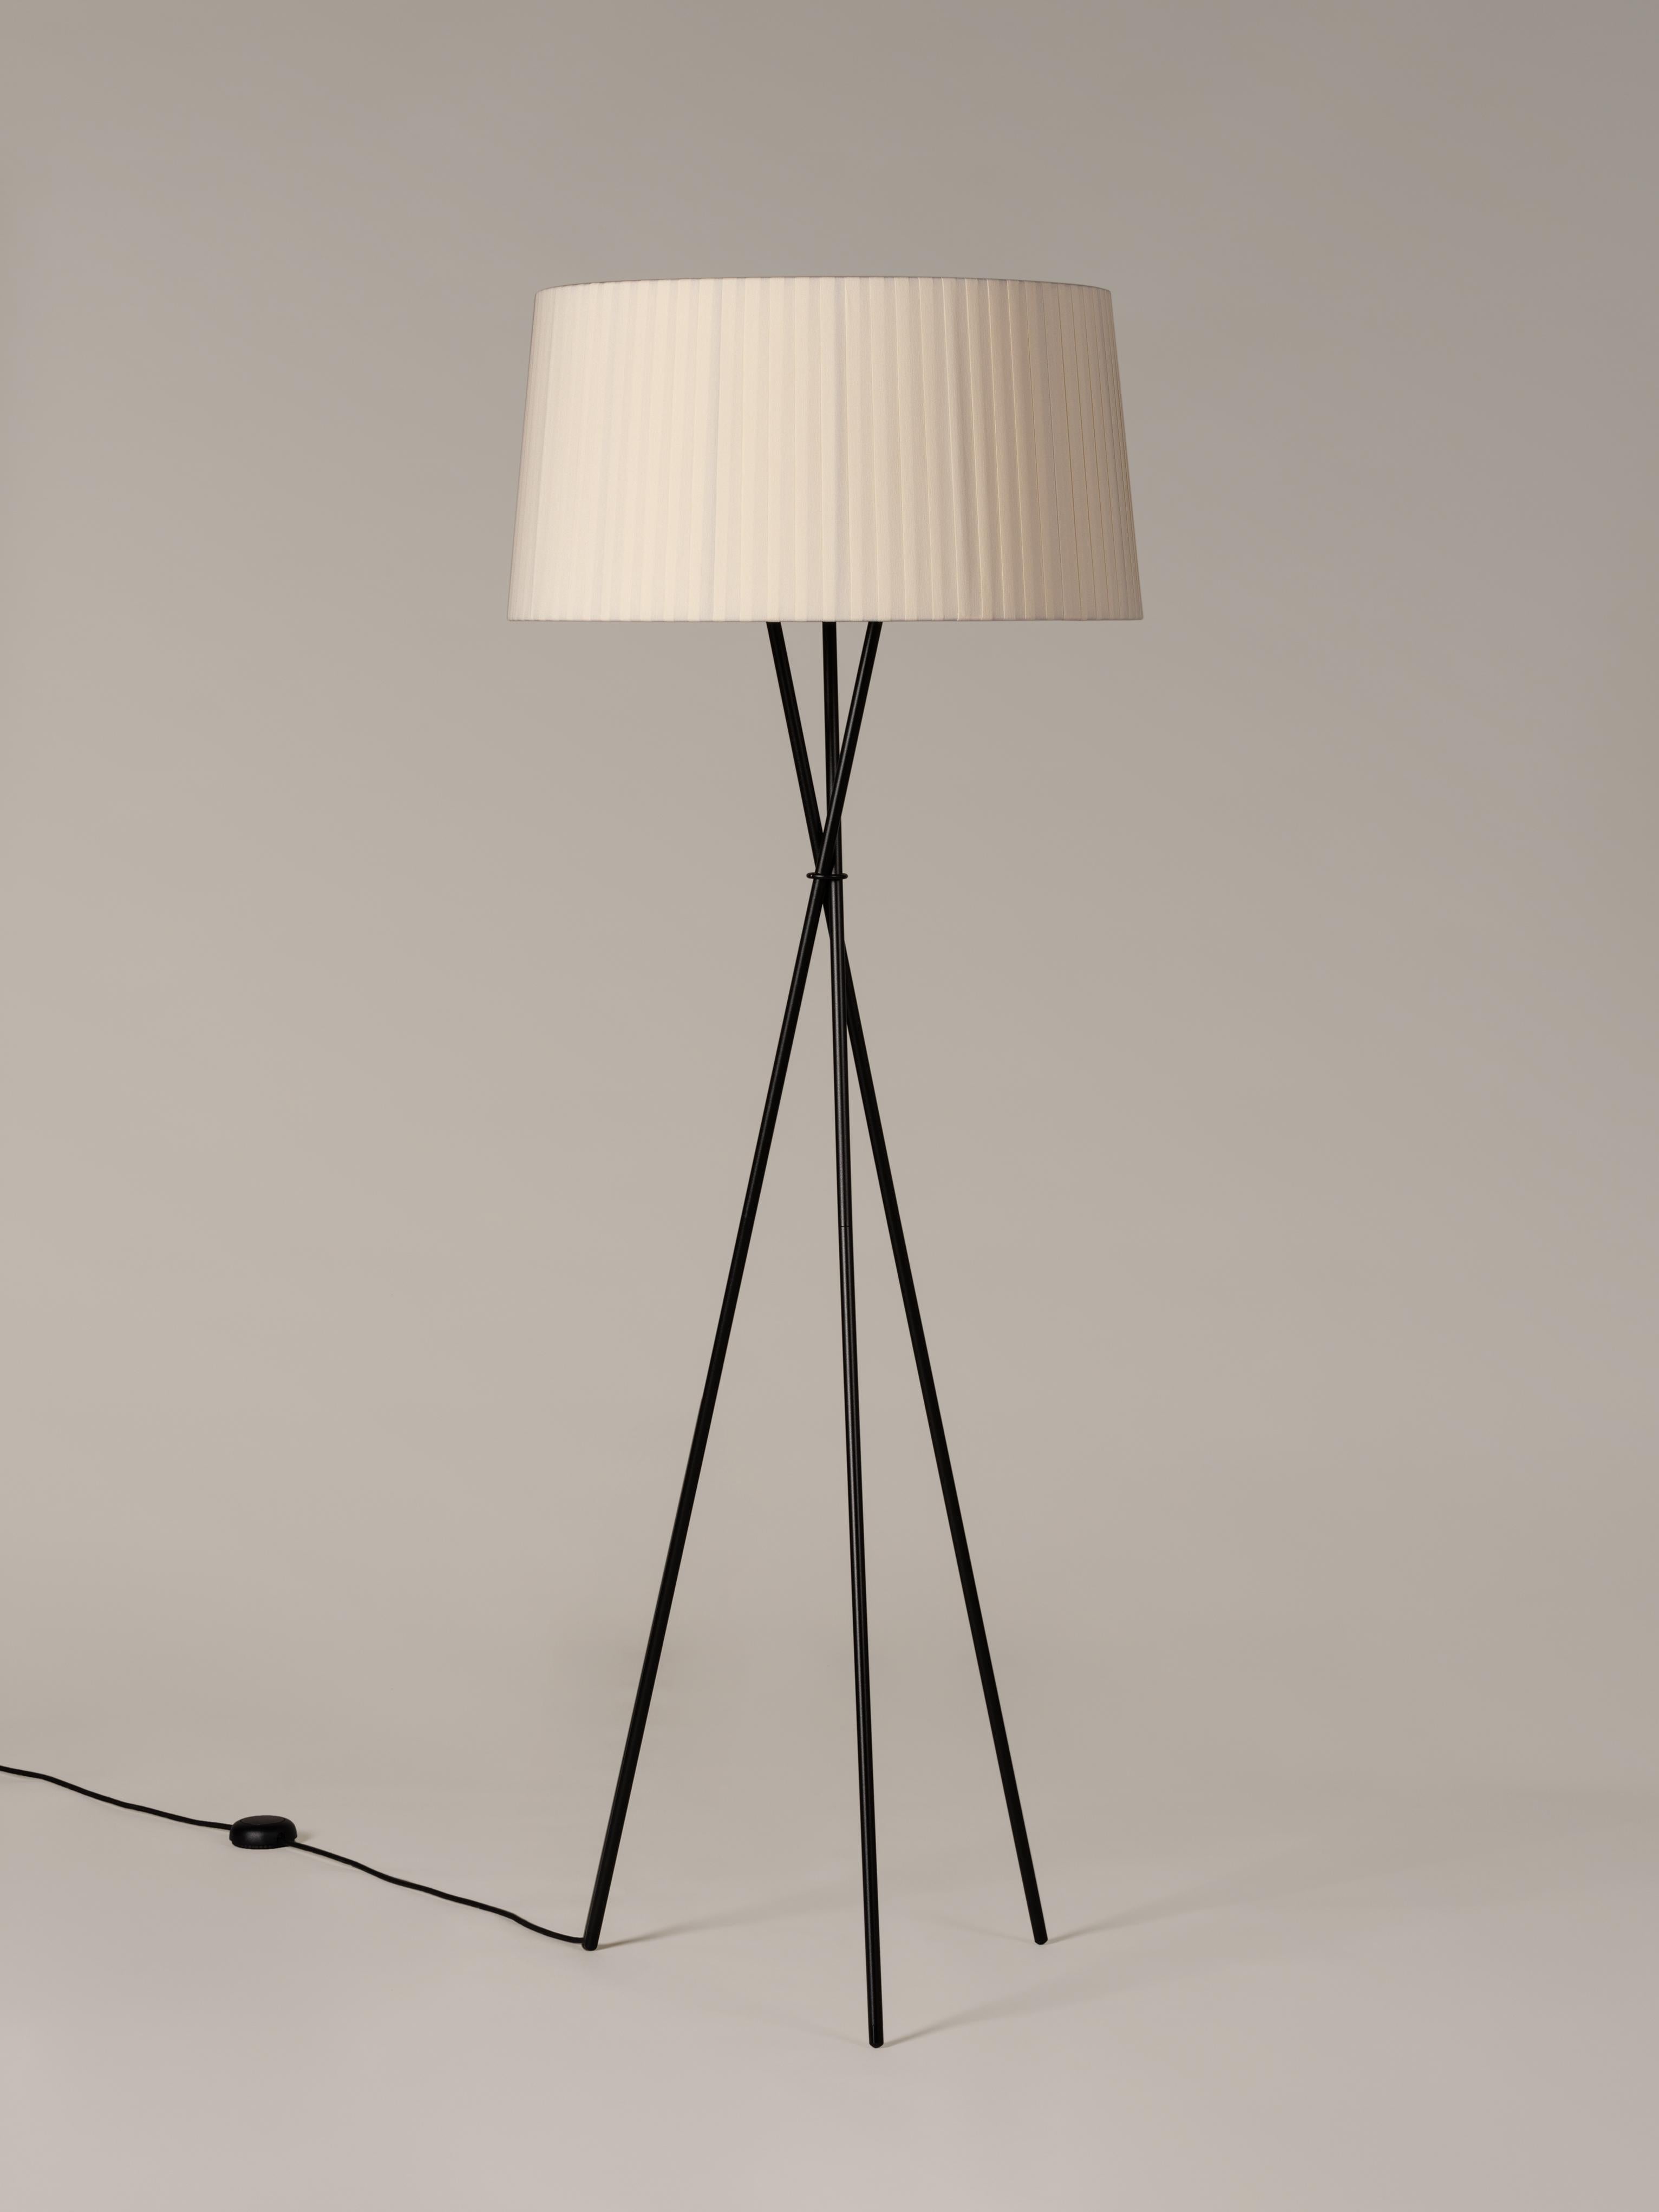 Natural trípode G5 floor lamp by Santa & Cole
Dimensions: D 62 x H 168 cm
Materials: Metal, ribbon.
Available in other colors.

Trípode humanises neutral spaces with its colourful and functional sobriety. The shade is hand ribboned and its base